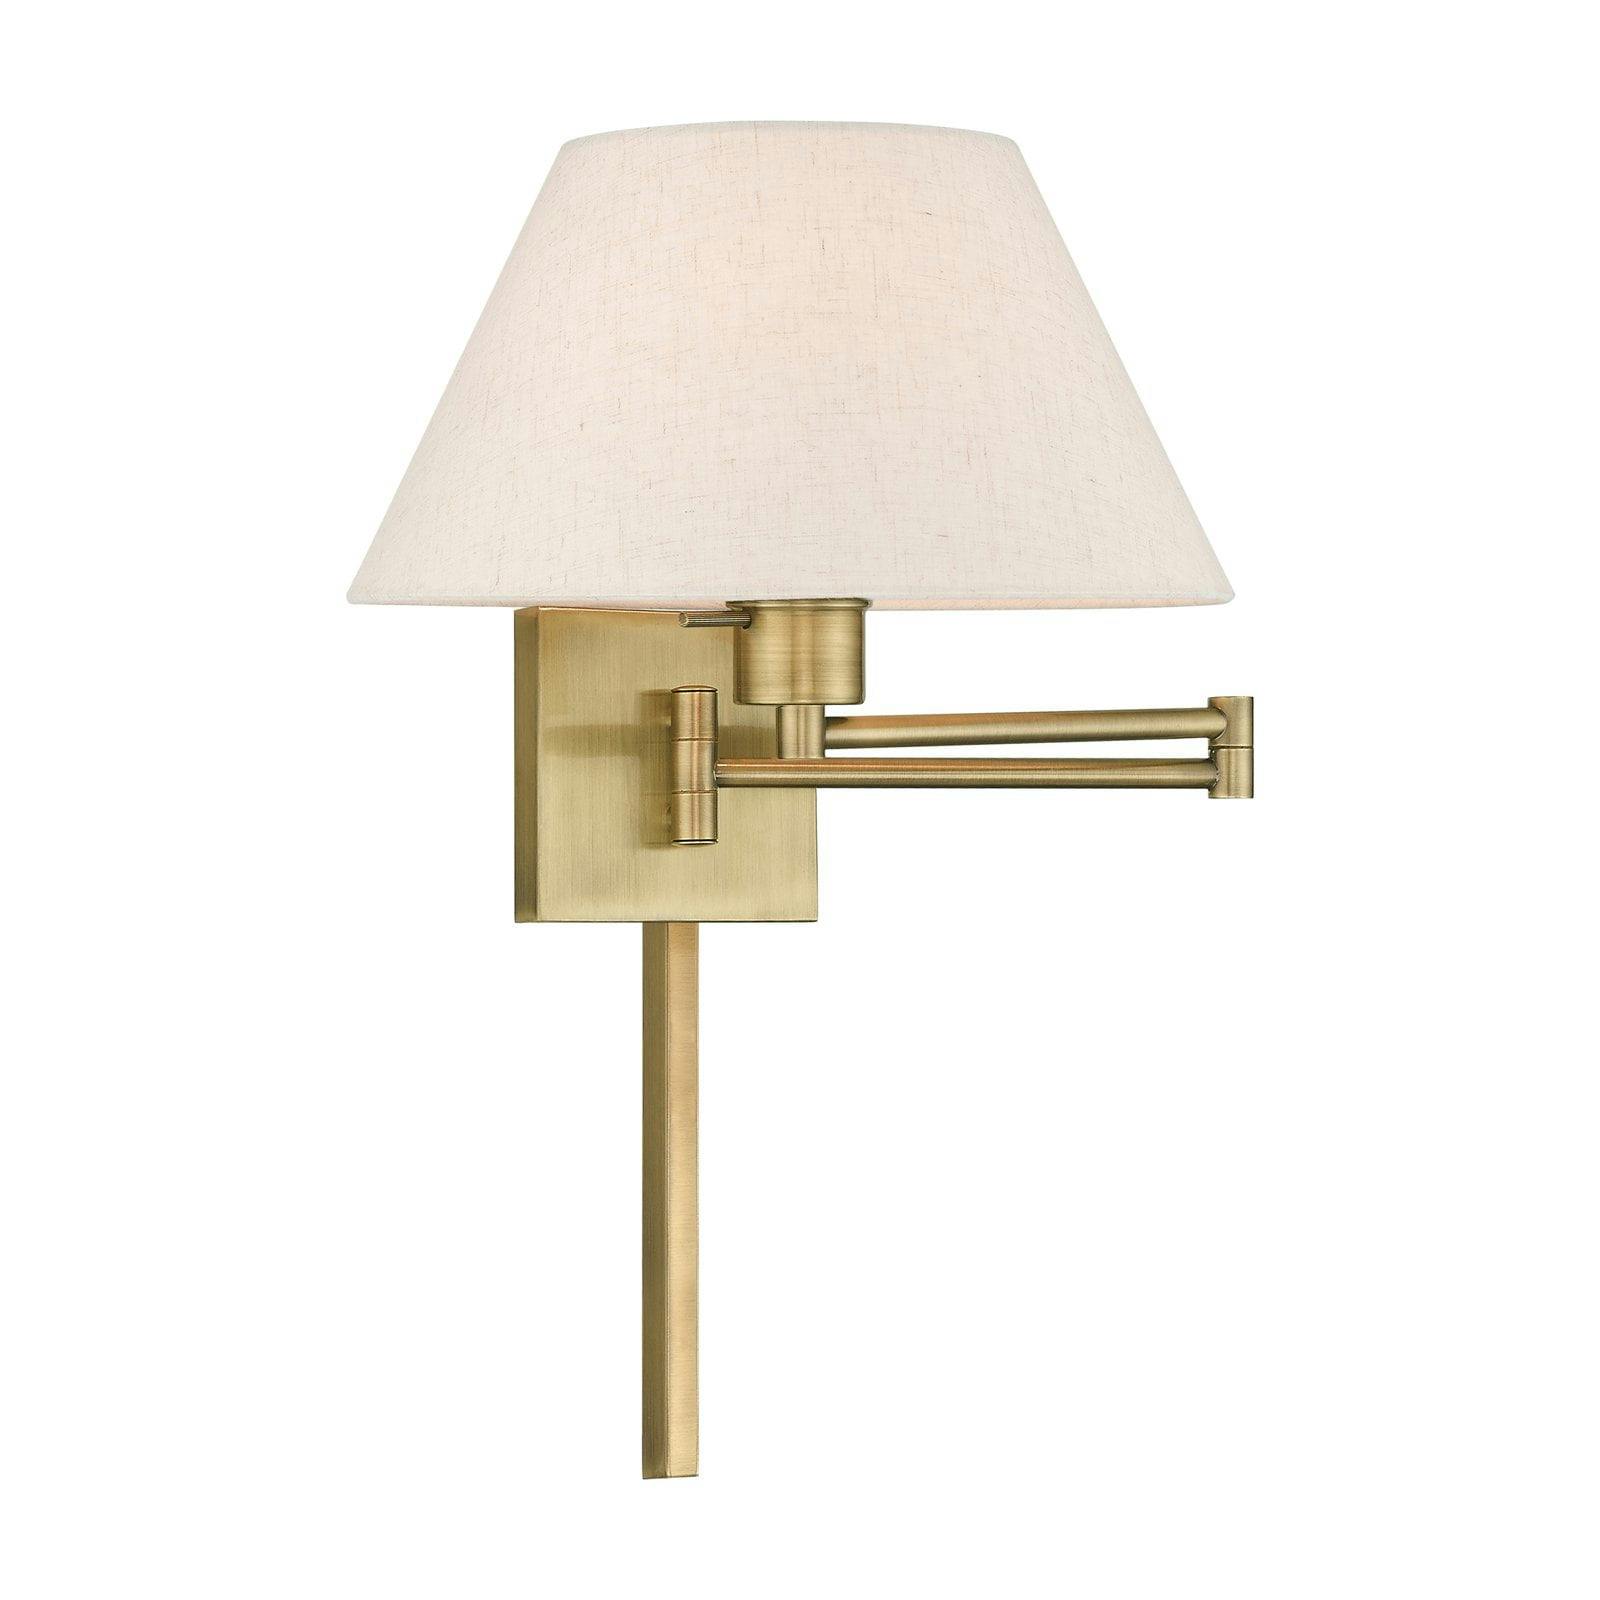 Antique Brass Swing Arm Wall Lamp with Satin Shade